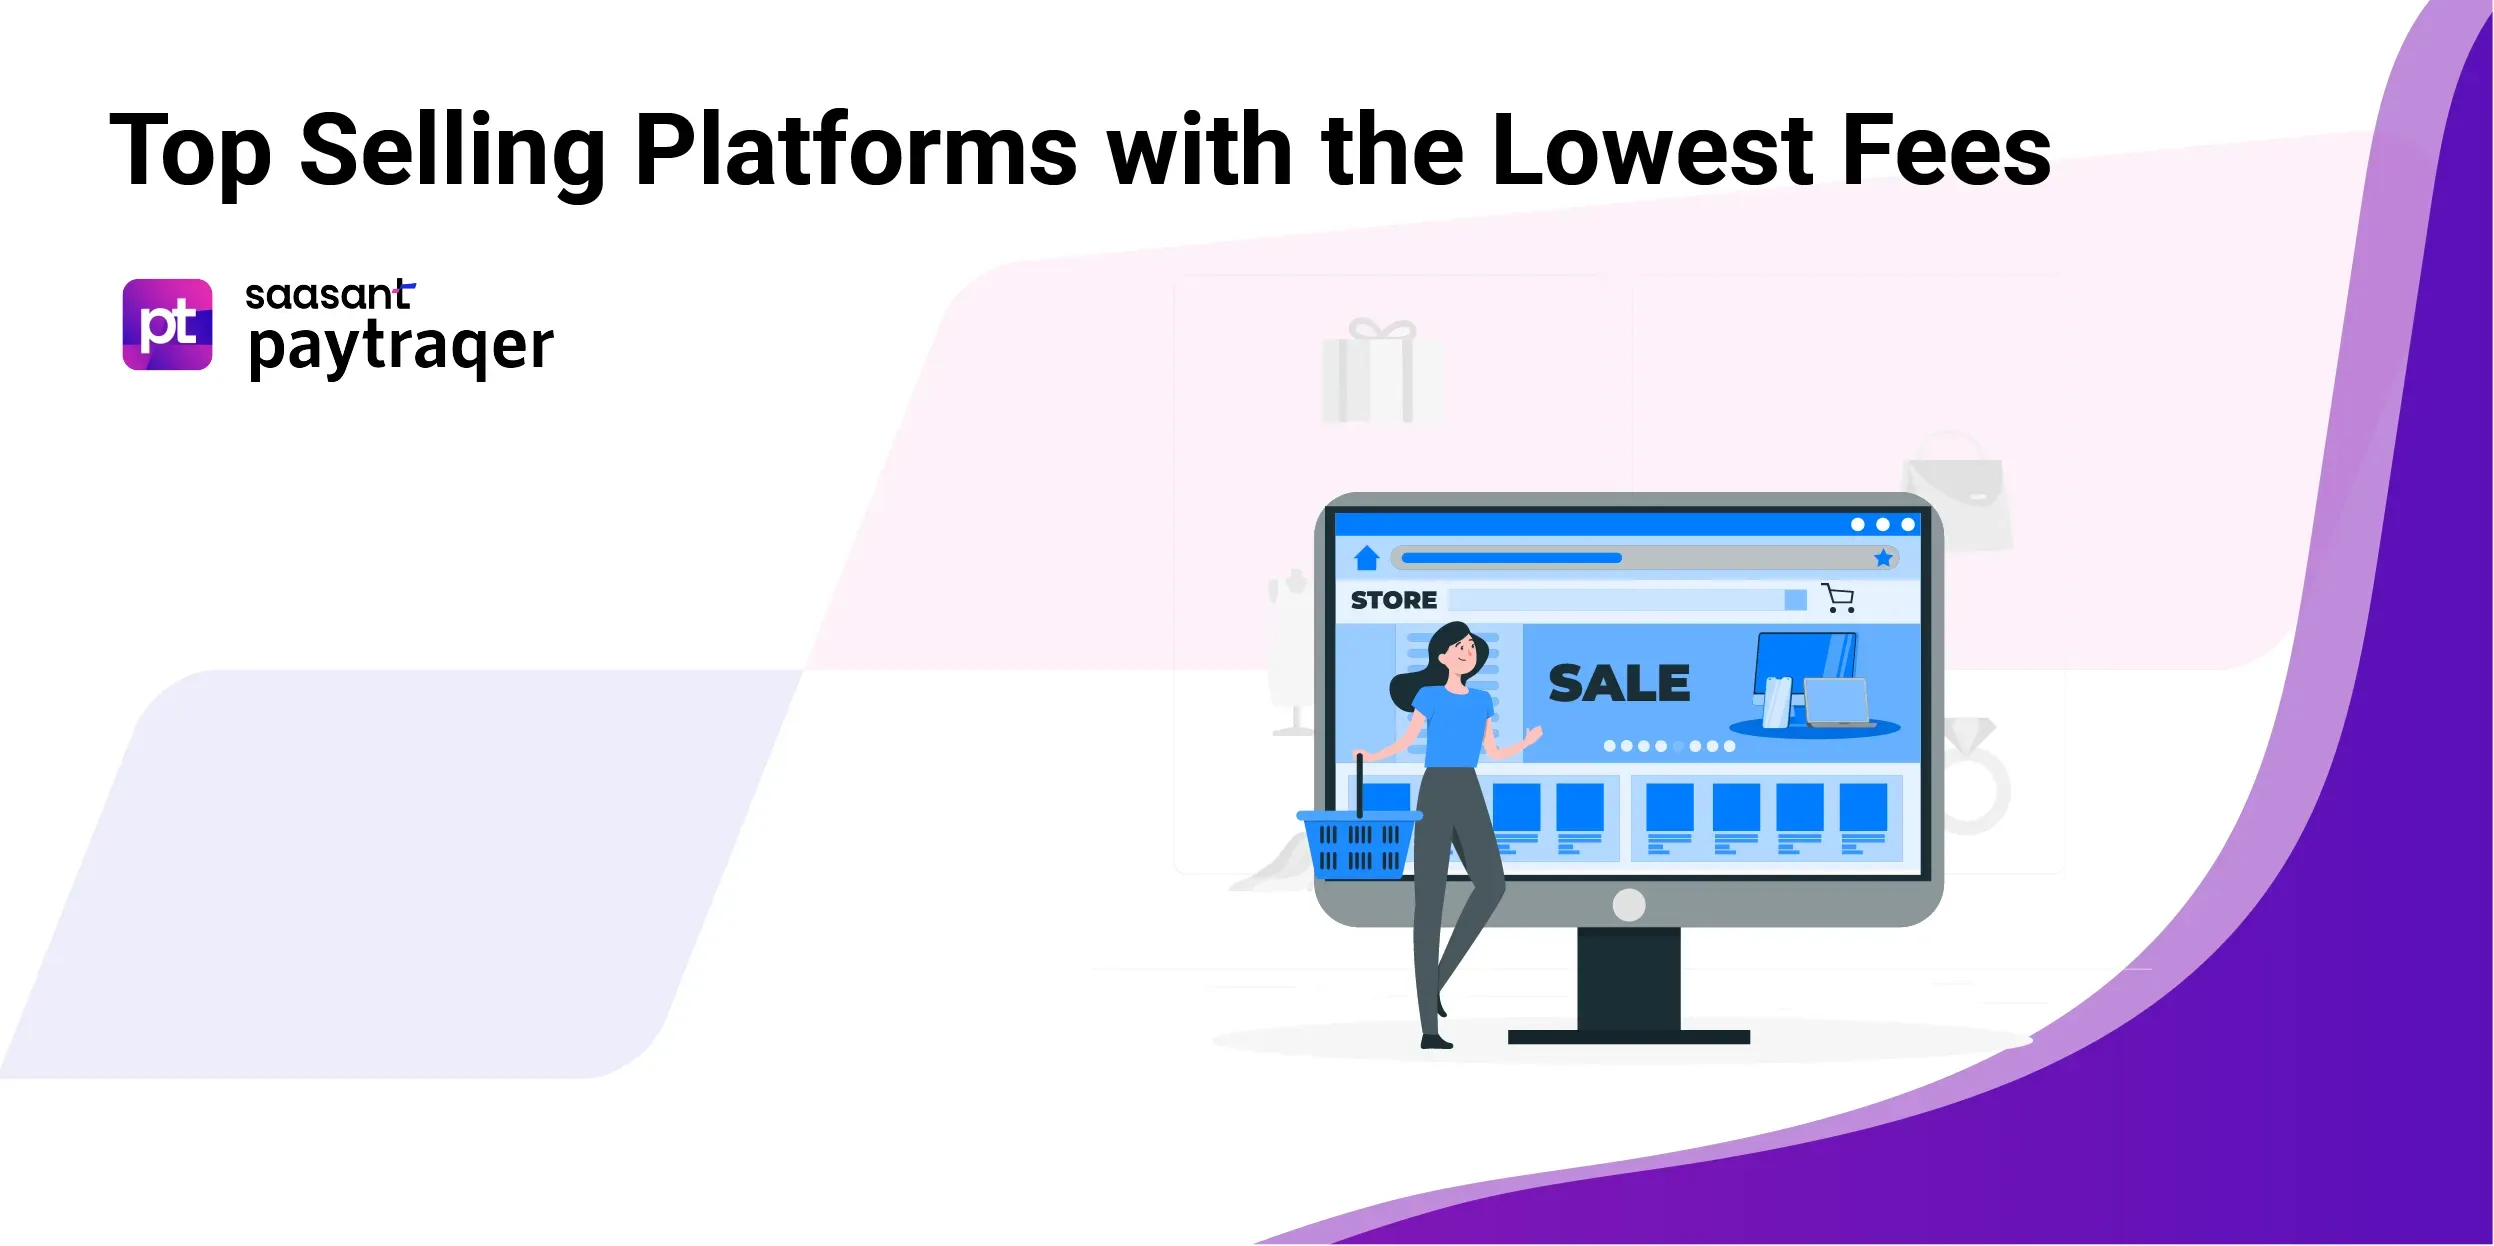 Top 5 Selling Platforms with the Lowest Fees for Online Sellers in